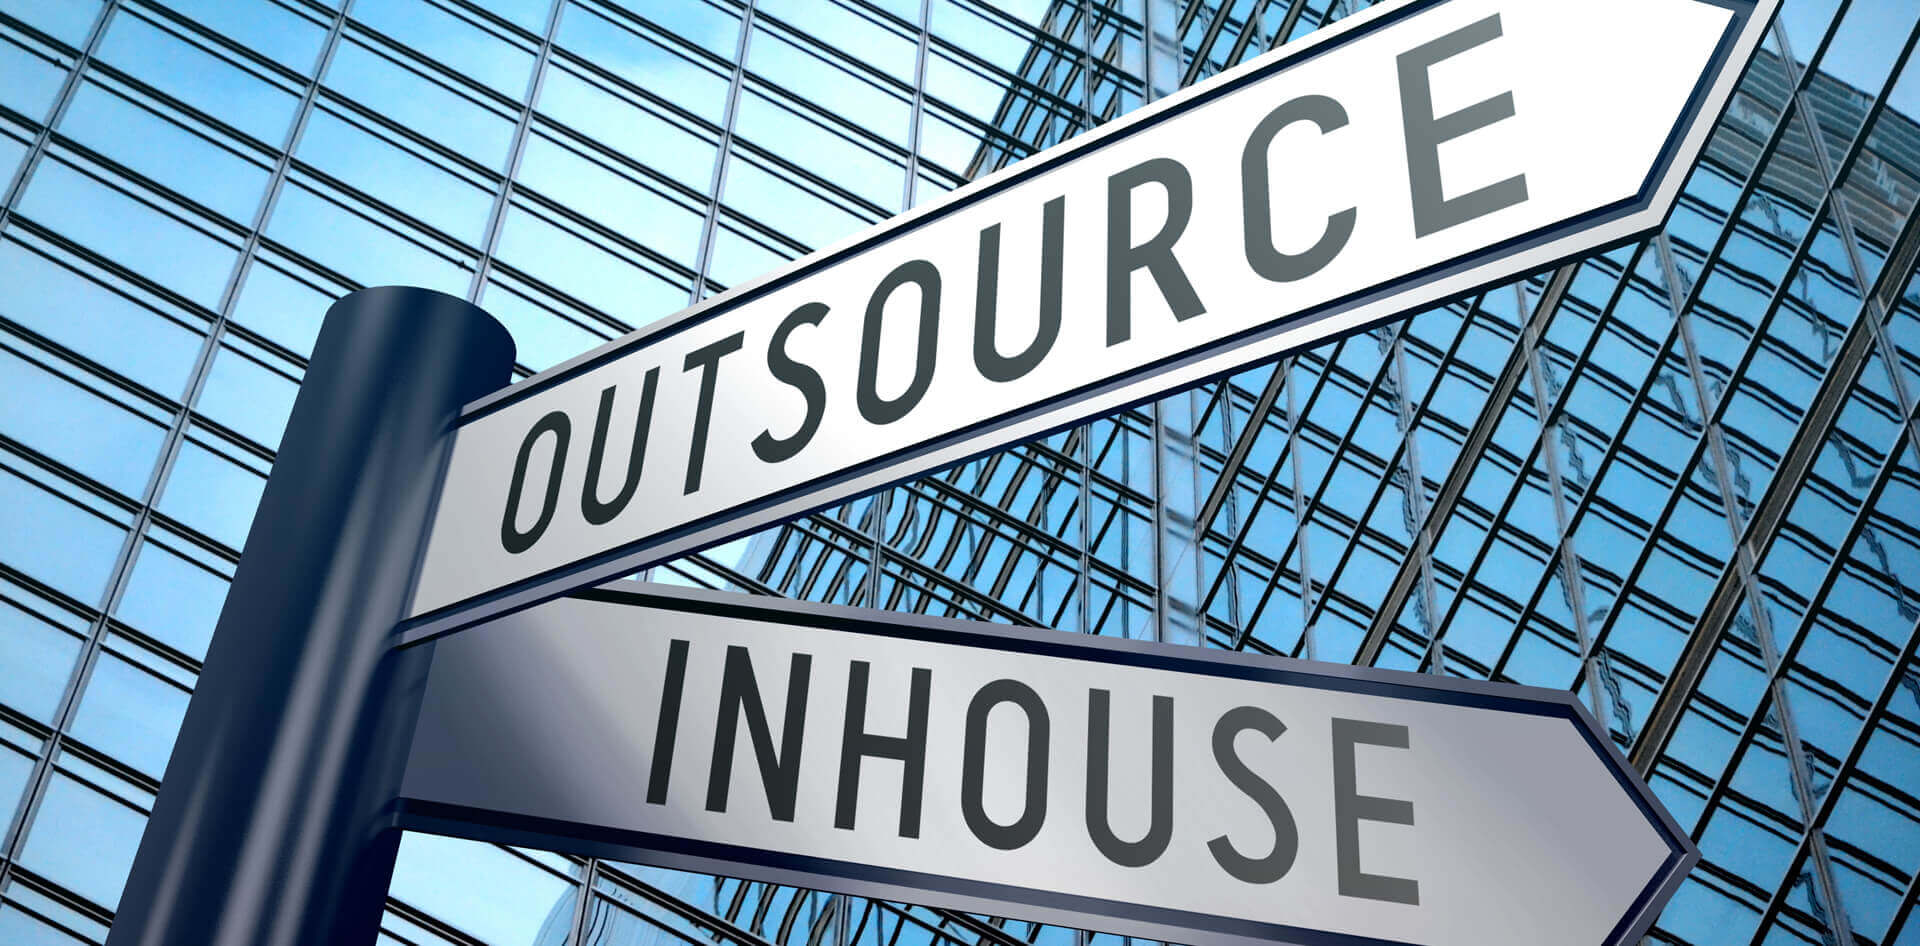 In-house or <em>Outsource</em>?